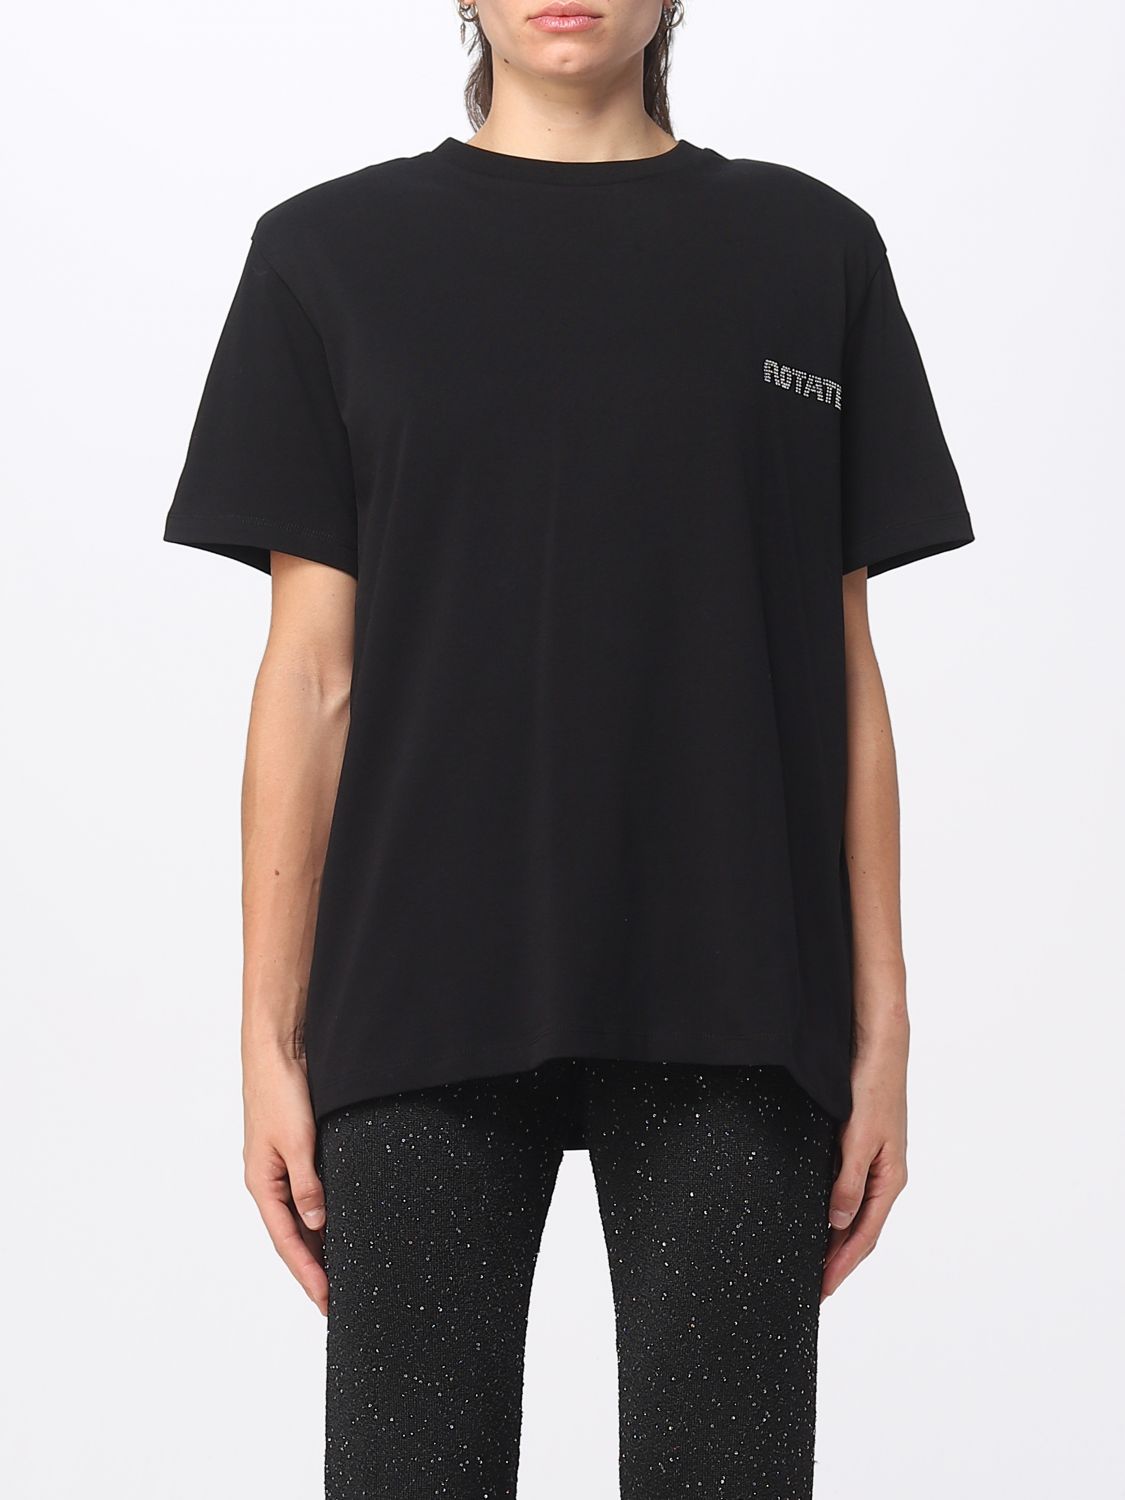 Black | t-shirt woman at Rotate - online ROTATE: t-shirt 111212100 for